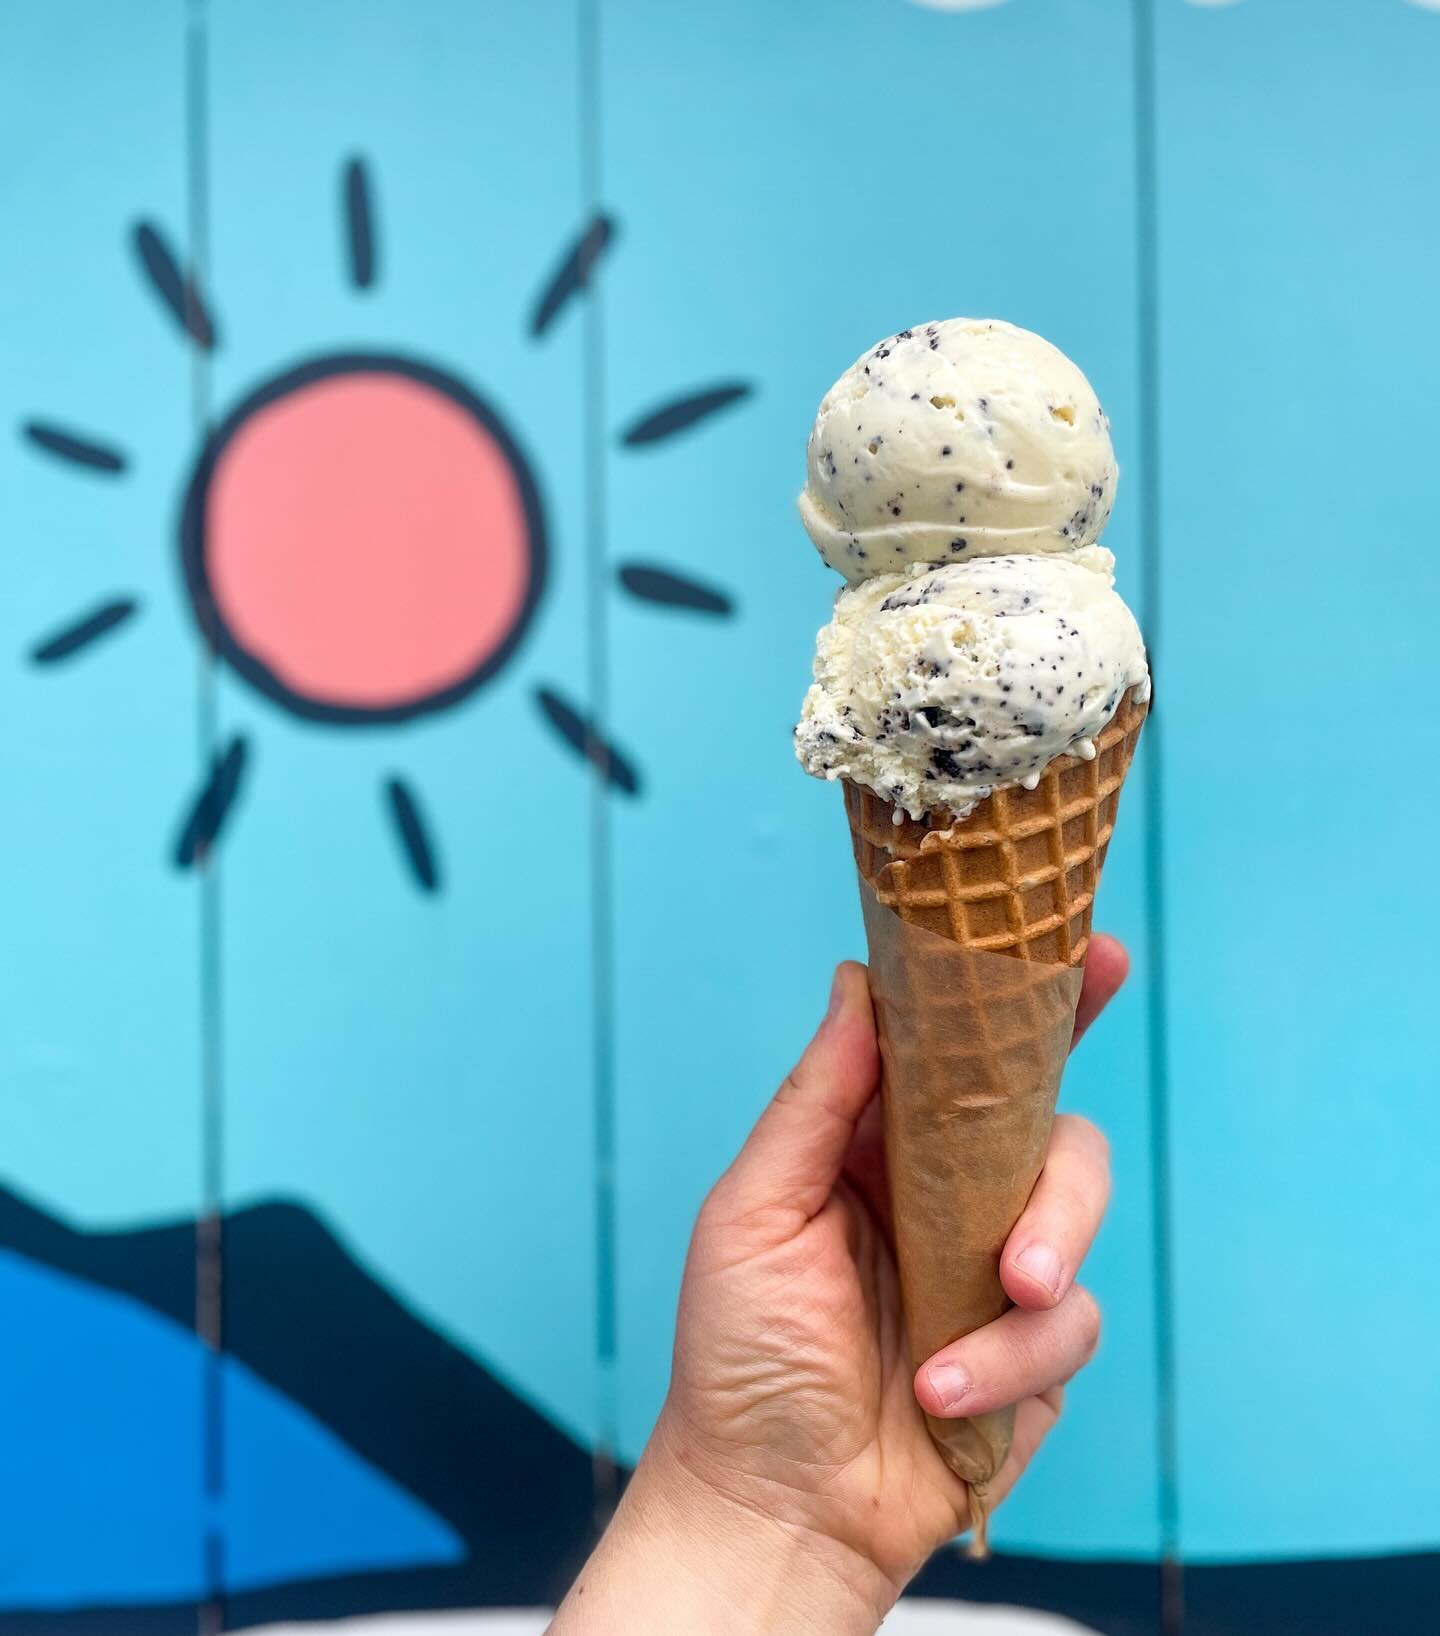 We&rsquo;re back to being open inside! Scoops, pints, coffee, we&rsquo;ve got it all 🙃 12-8 PM Thursday - Monday 

MALTED MILK 🥛 &amp; COOKIES is now scooping!
Nostalgic malty sweet cream ice cream with our house made chocolate cookie crunchies 🤩
